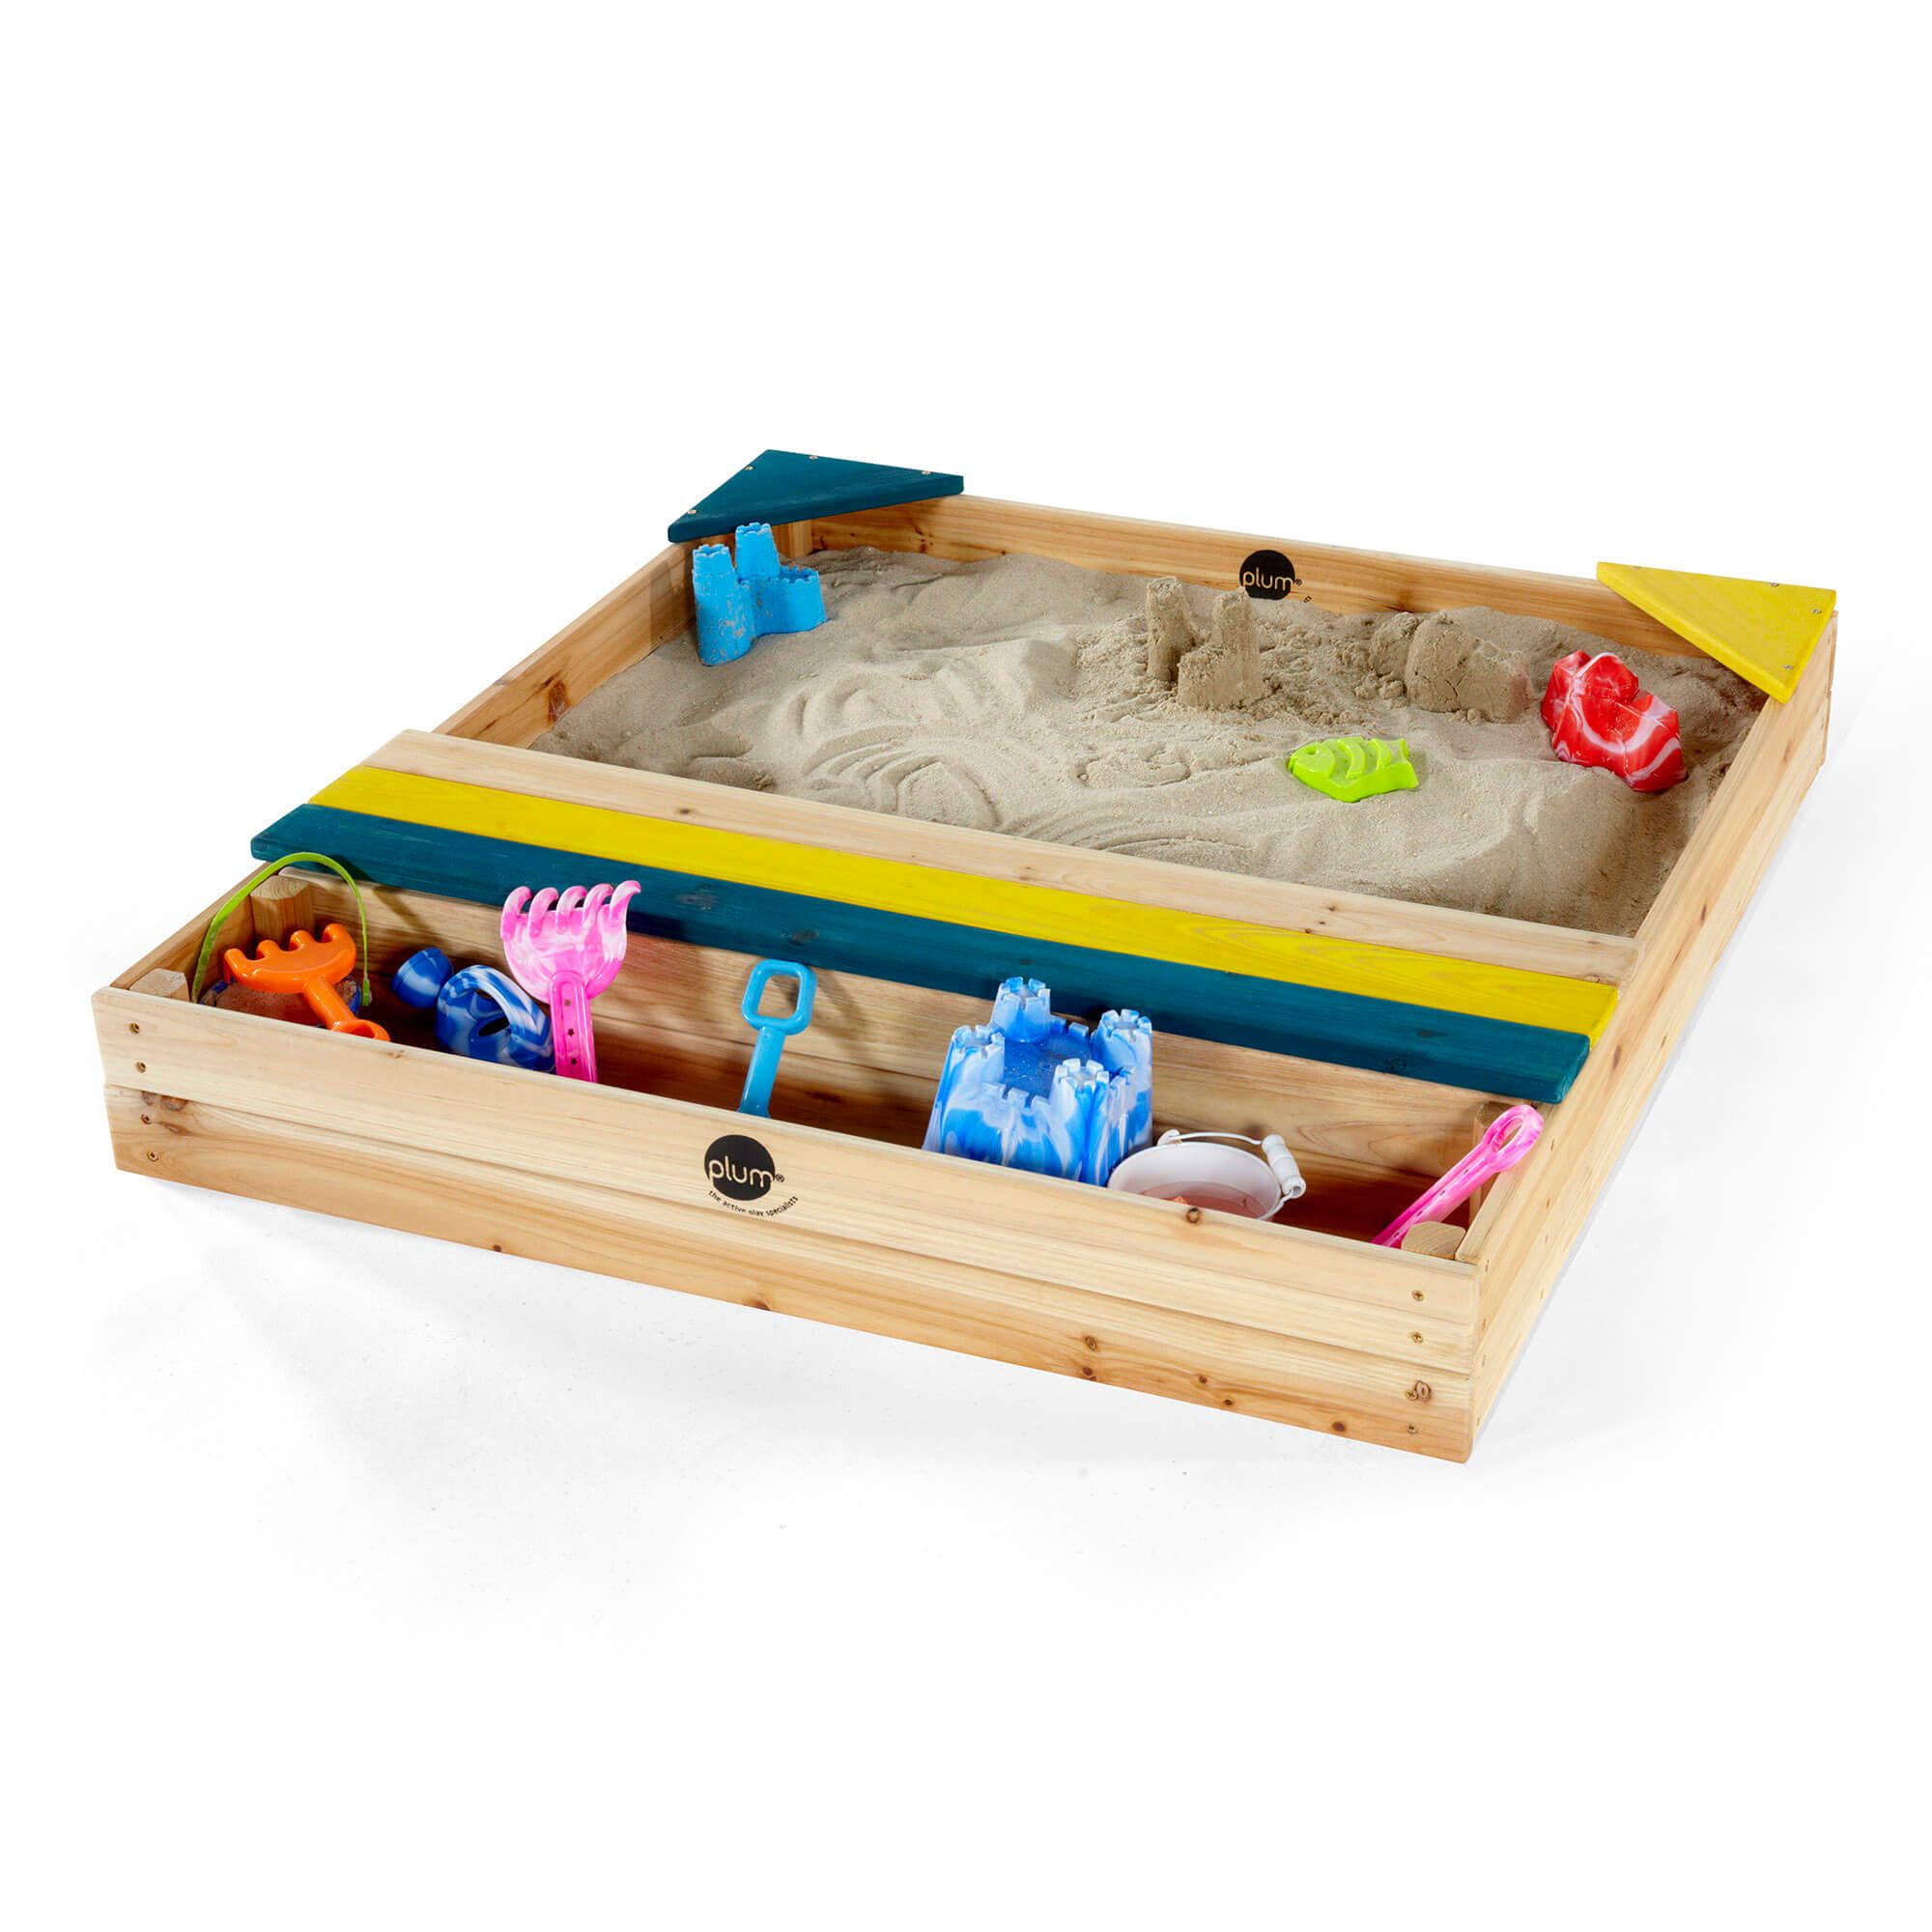 Store-it Wooden Sand Pit